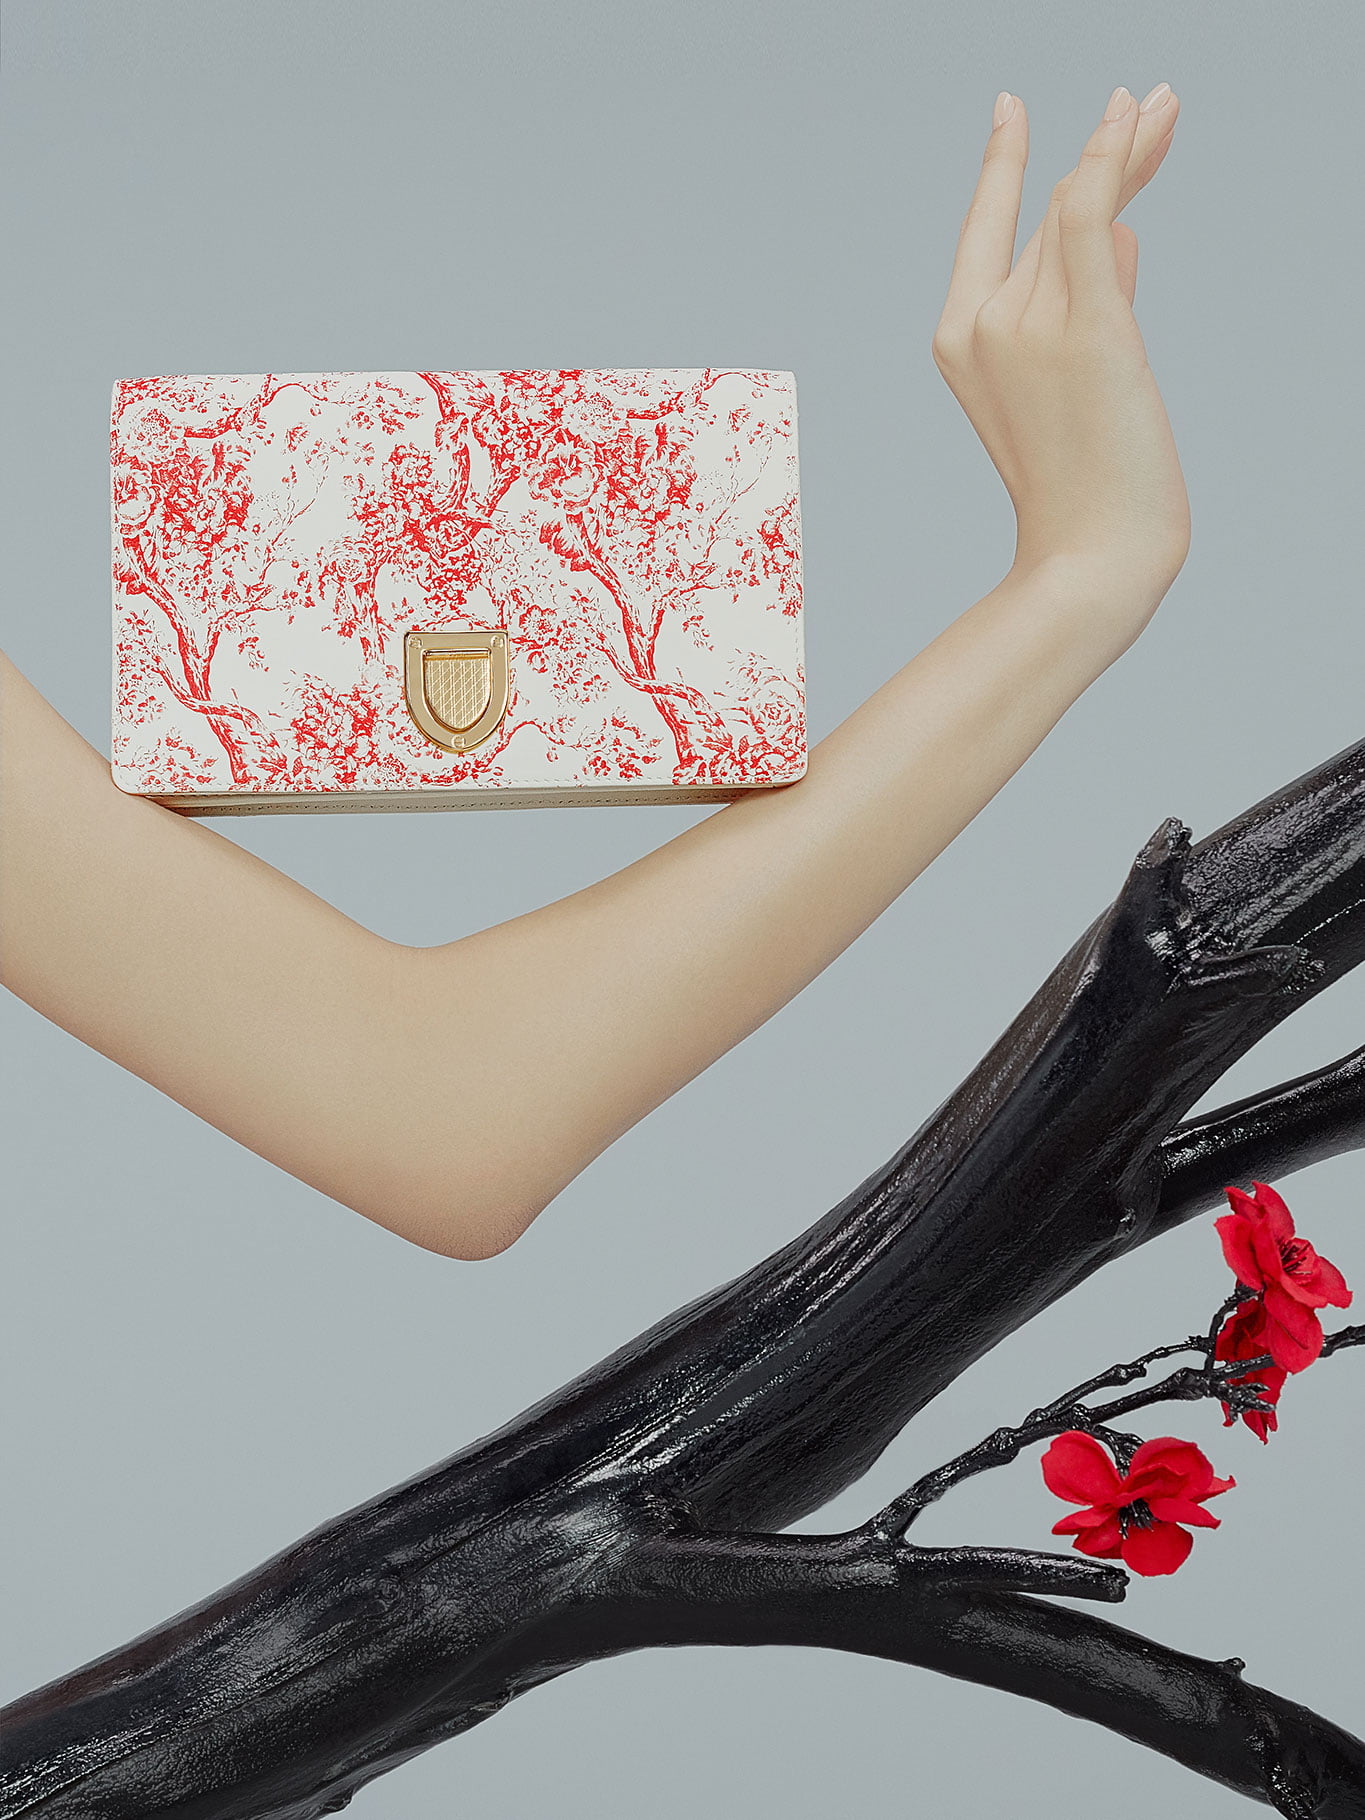 Here's How Celine, Dior and Louis Vuitton Celebrate Chinese New Year